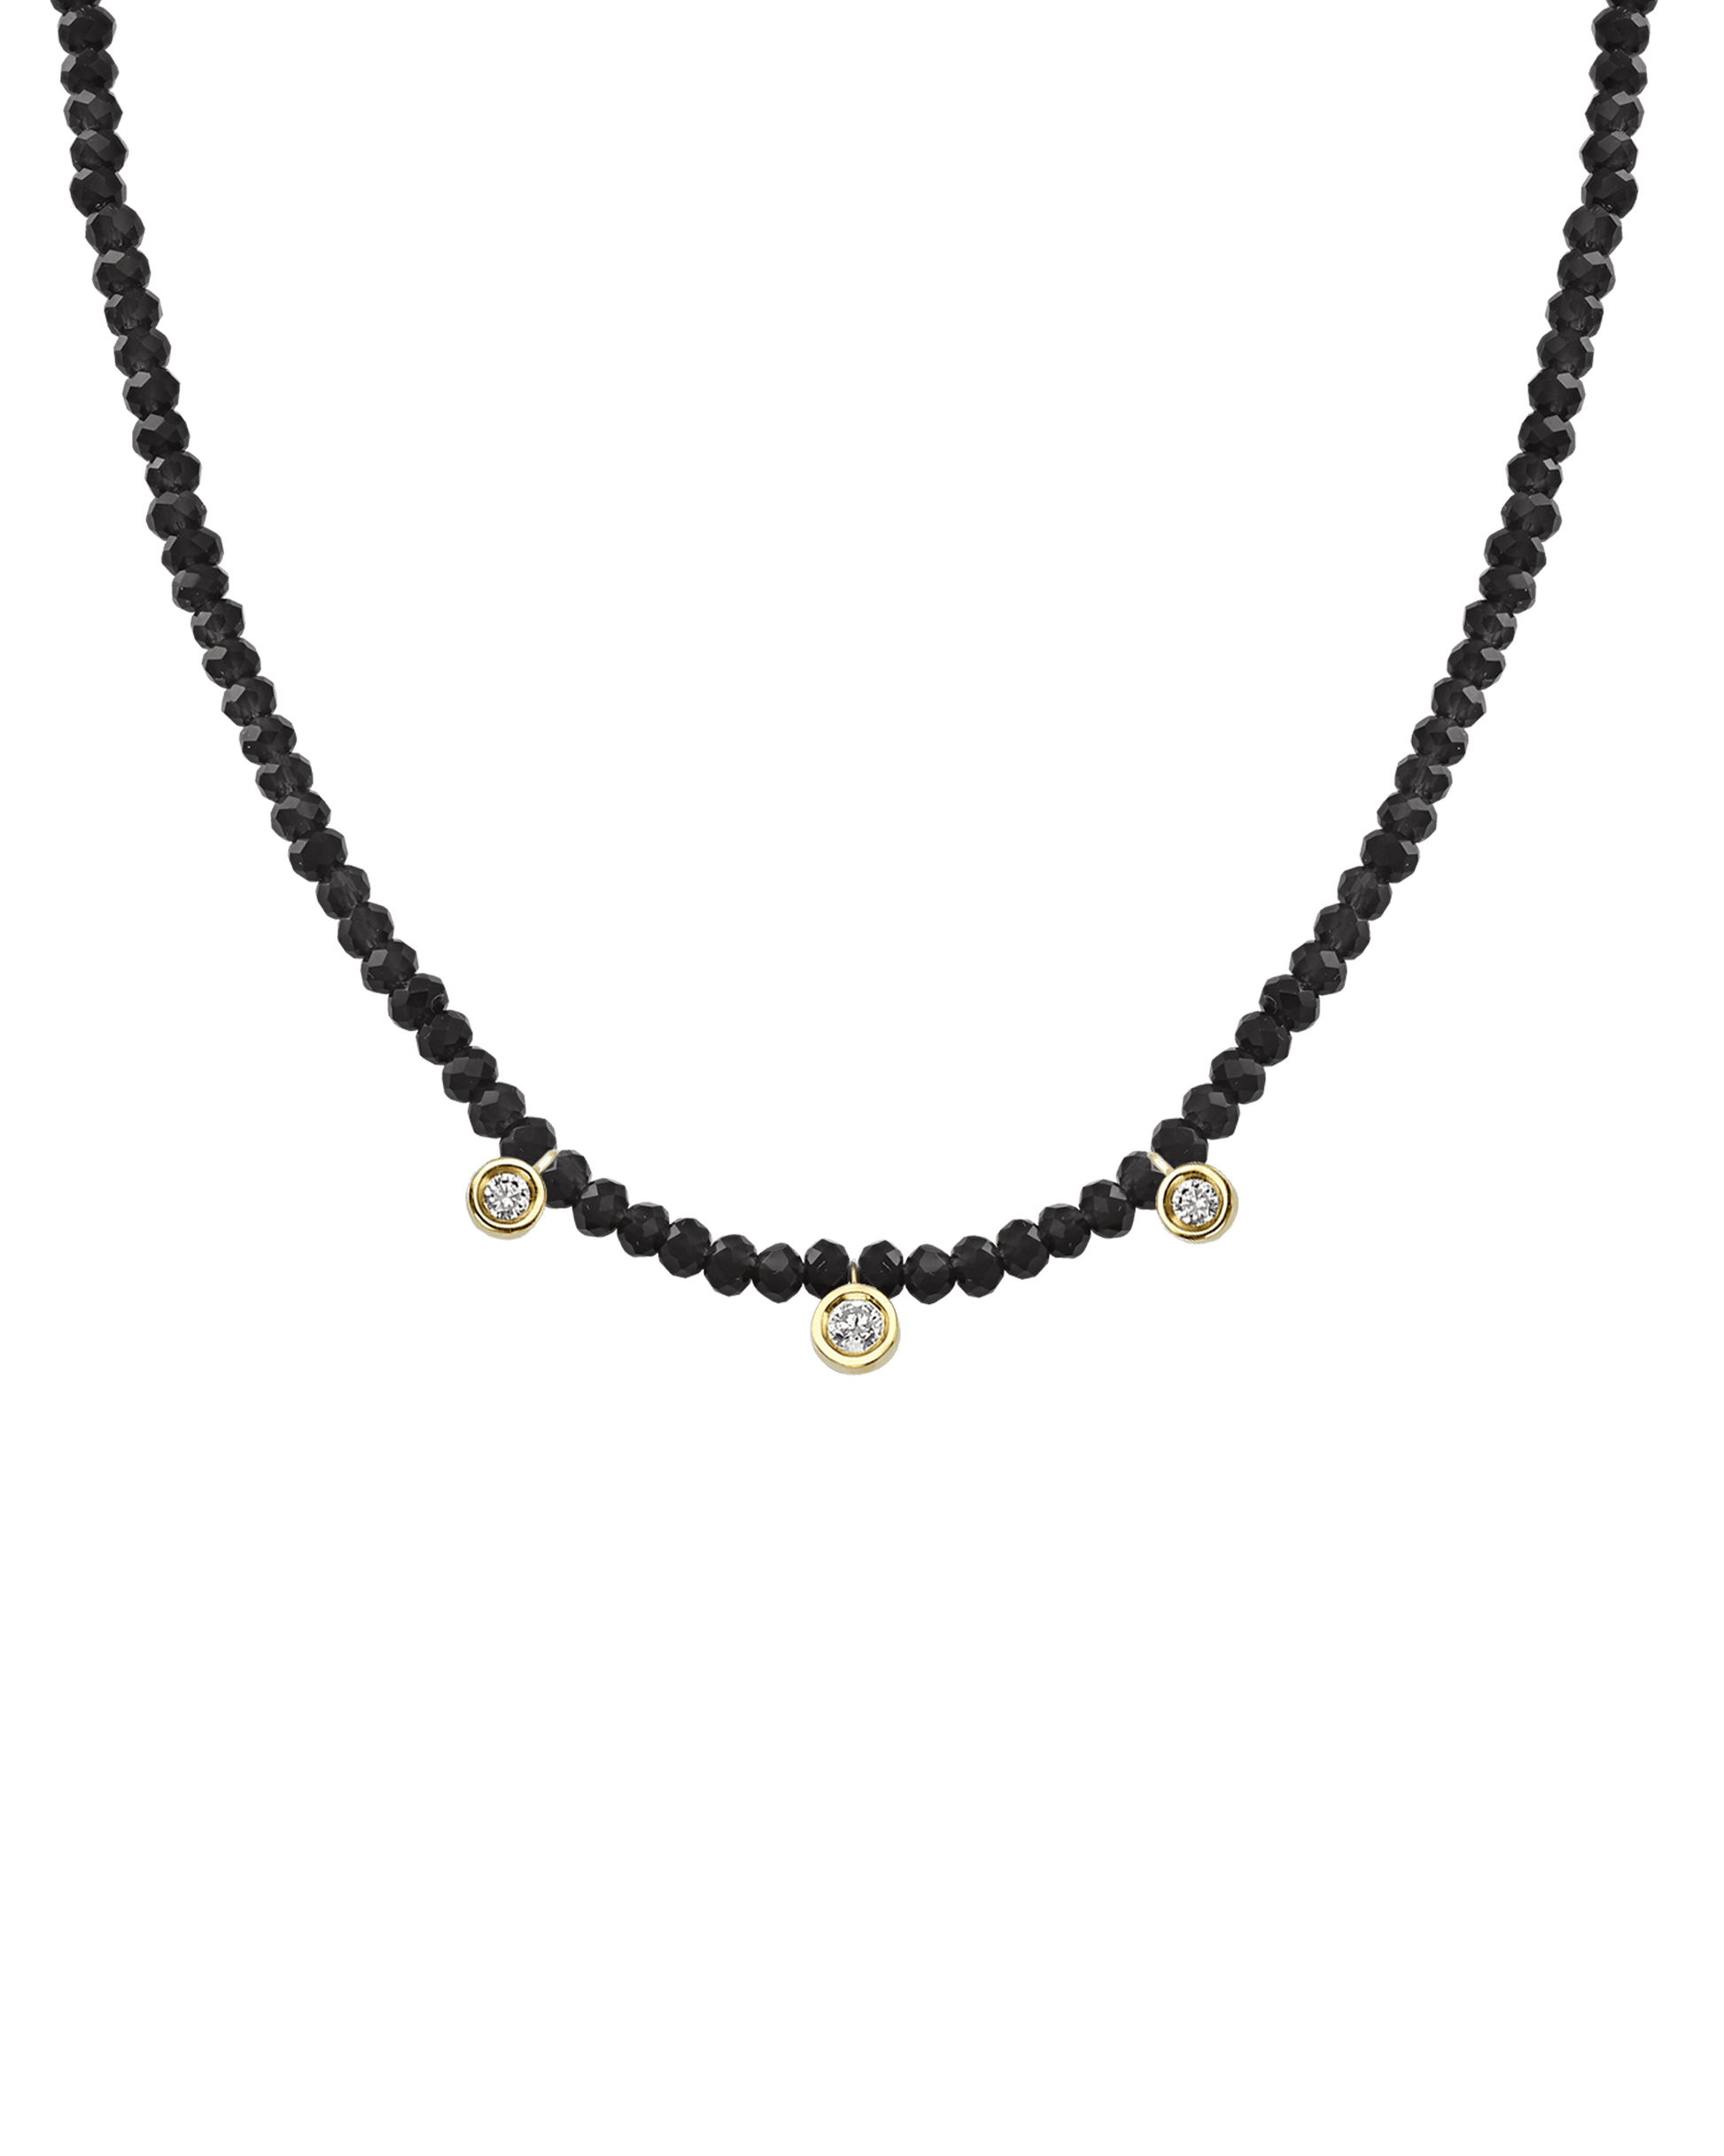 Black Spinel Gemstone & Three diamonds Necklace - 14K Yellow Gold Necklaces magal-dev Glass Beads Black Spinnel 14" - Collar 